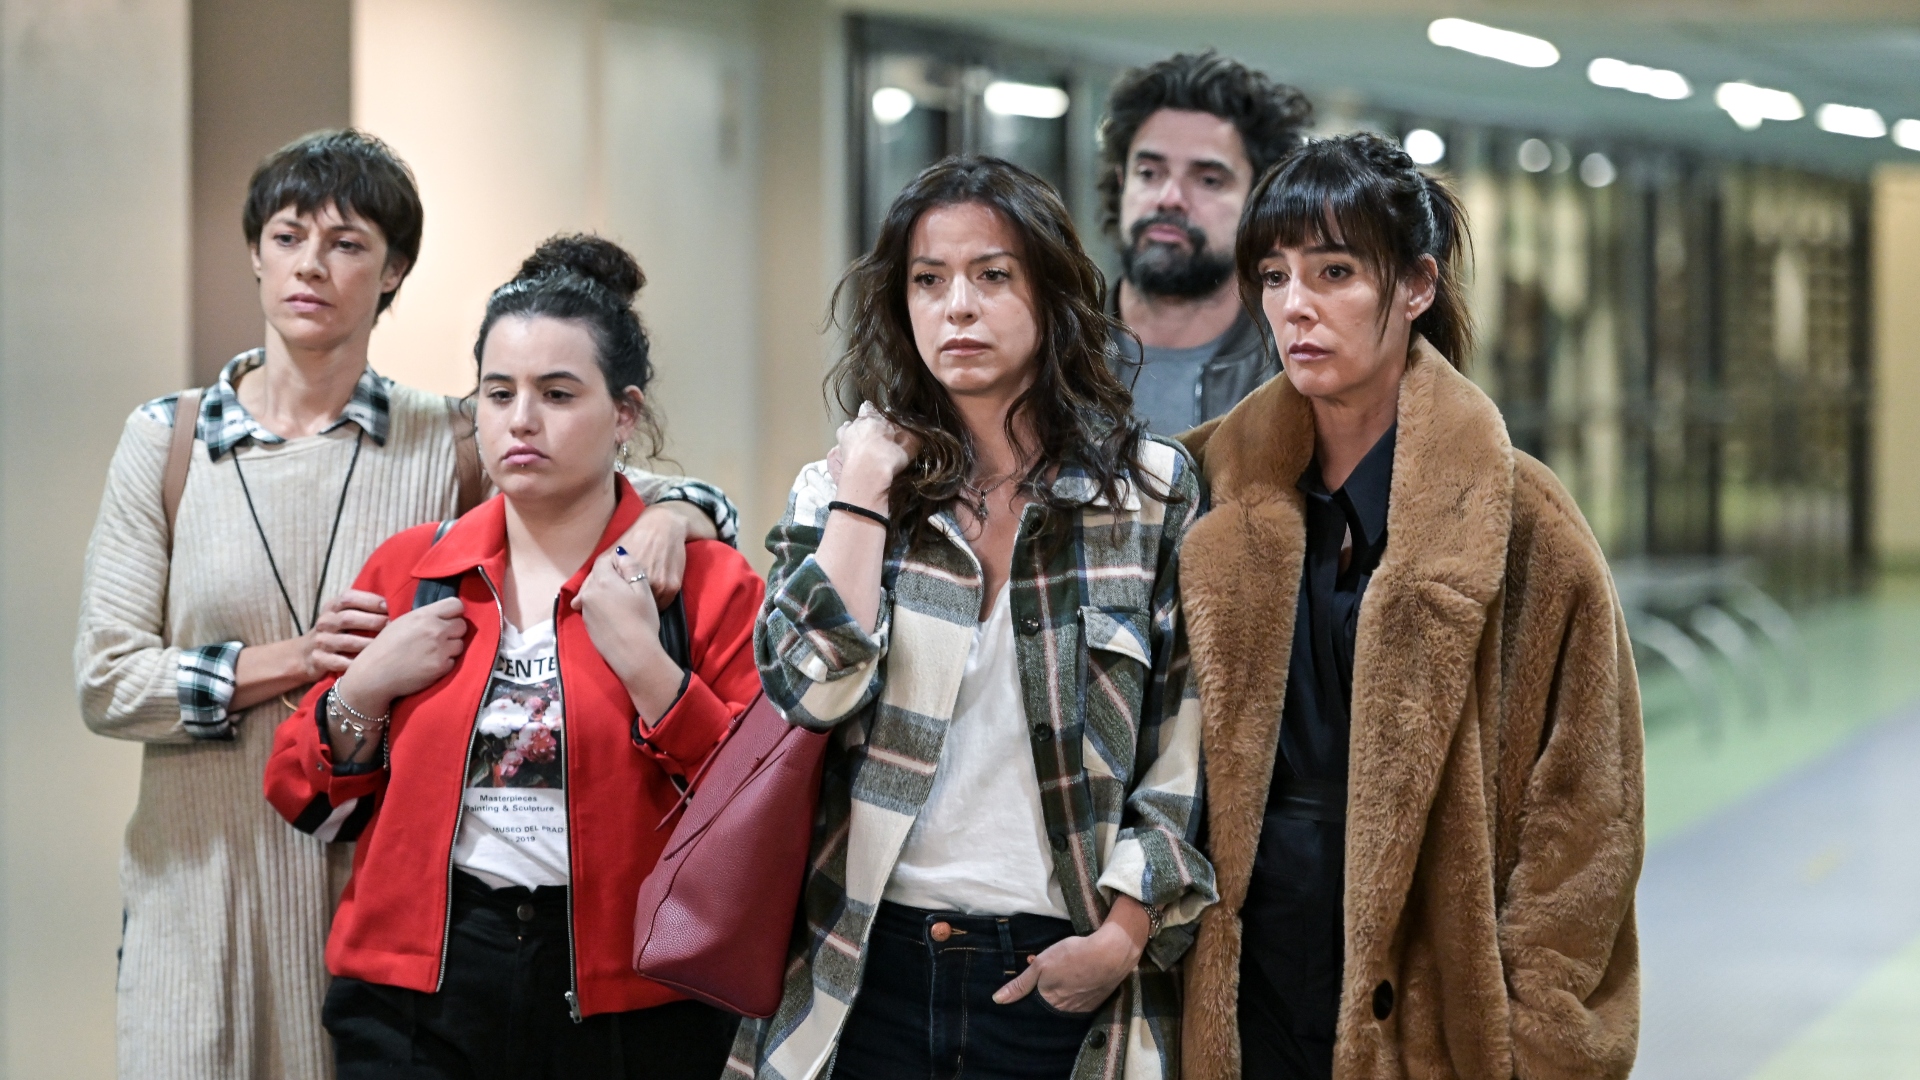 Rocío Gómez Wlosko with Alexia Moyano, Mercedes Funes, Paola Krum and Luciano Castro in the scene where Benjamín Vicuña's character is operated on for a head tumor